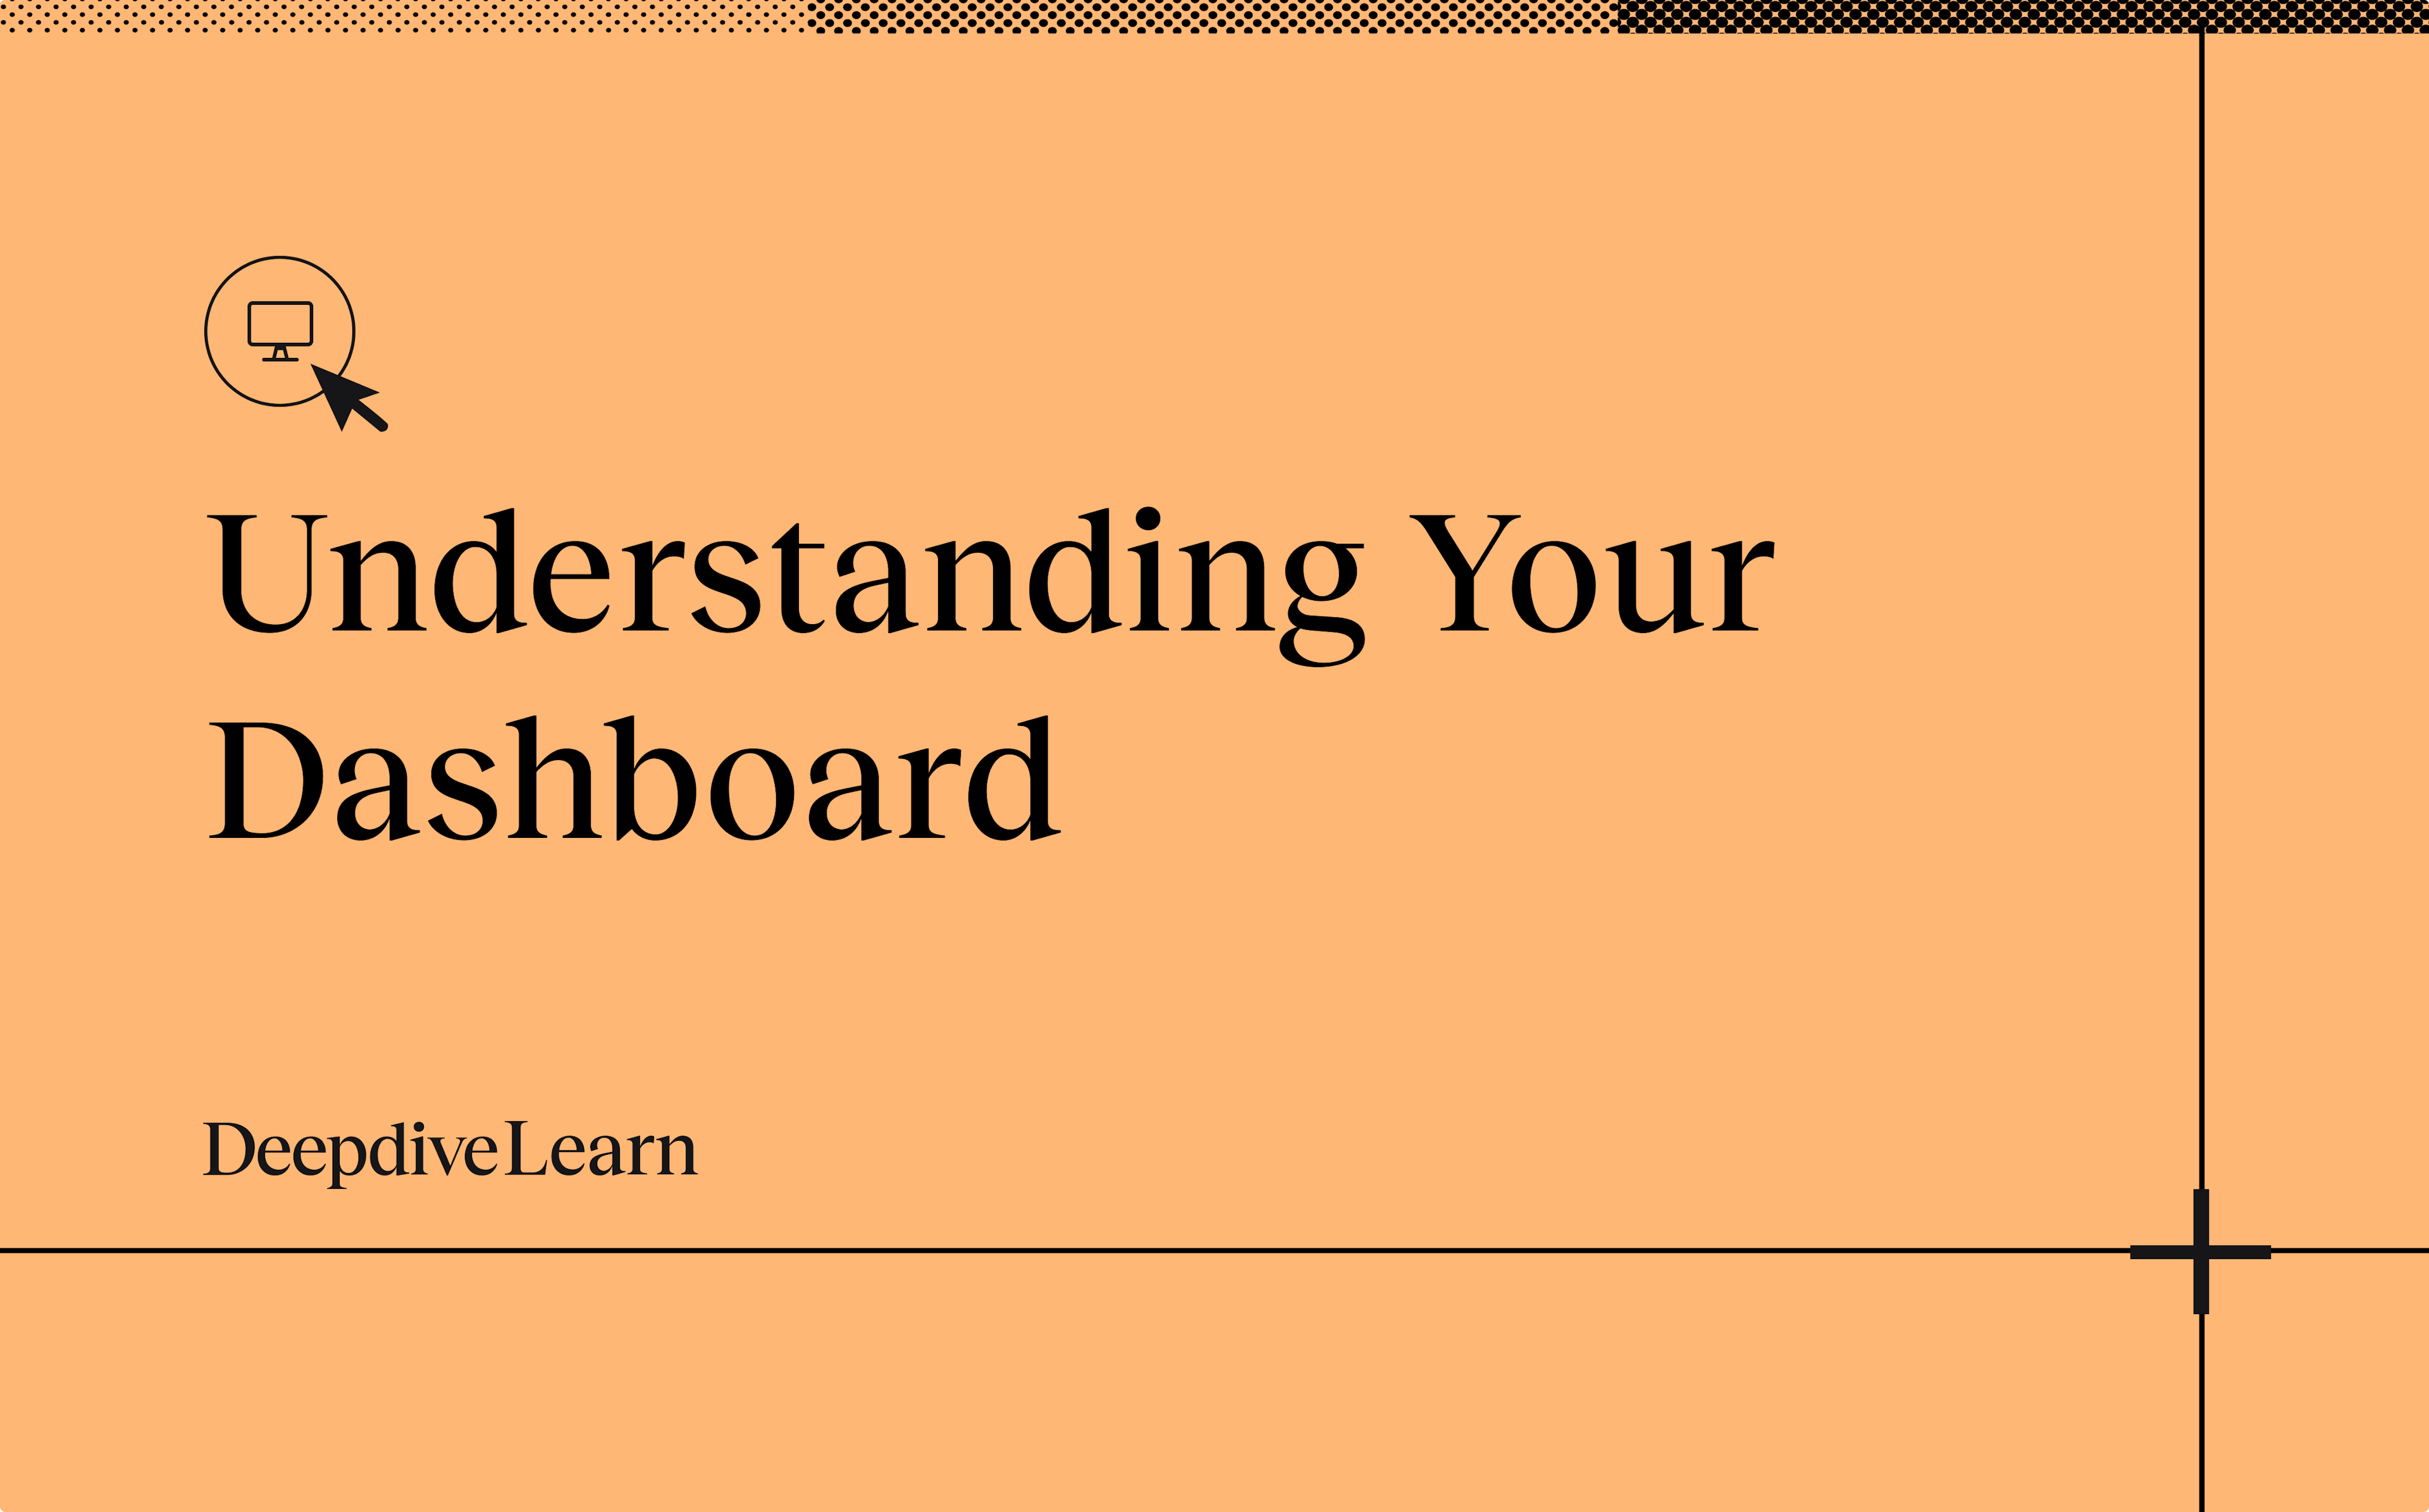 Understanding your dashboard by Deepdive Learn